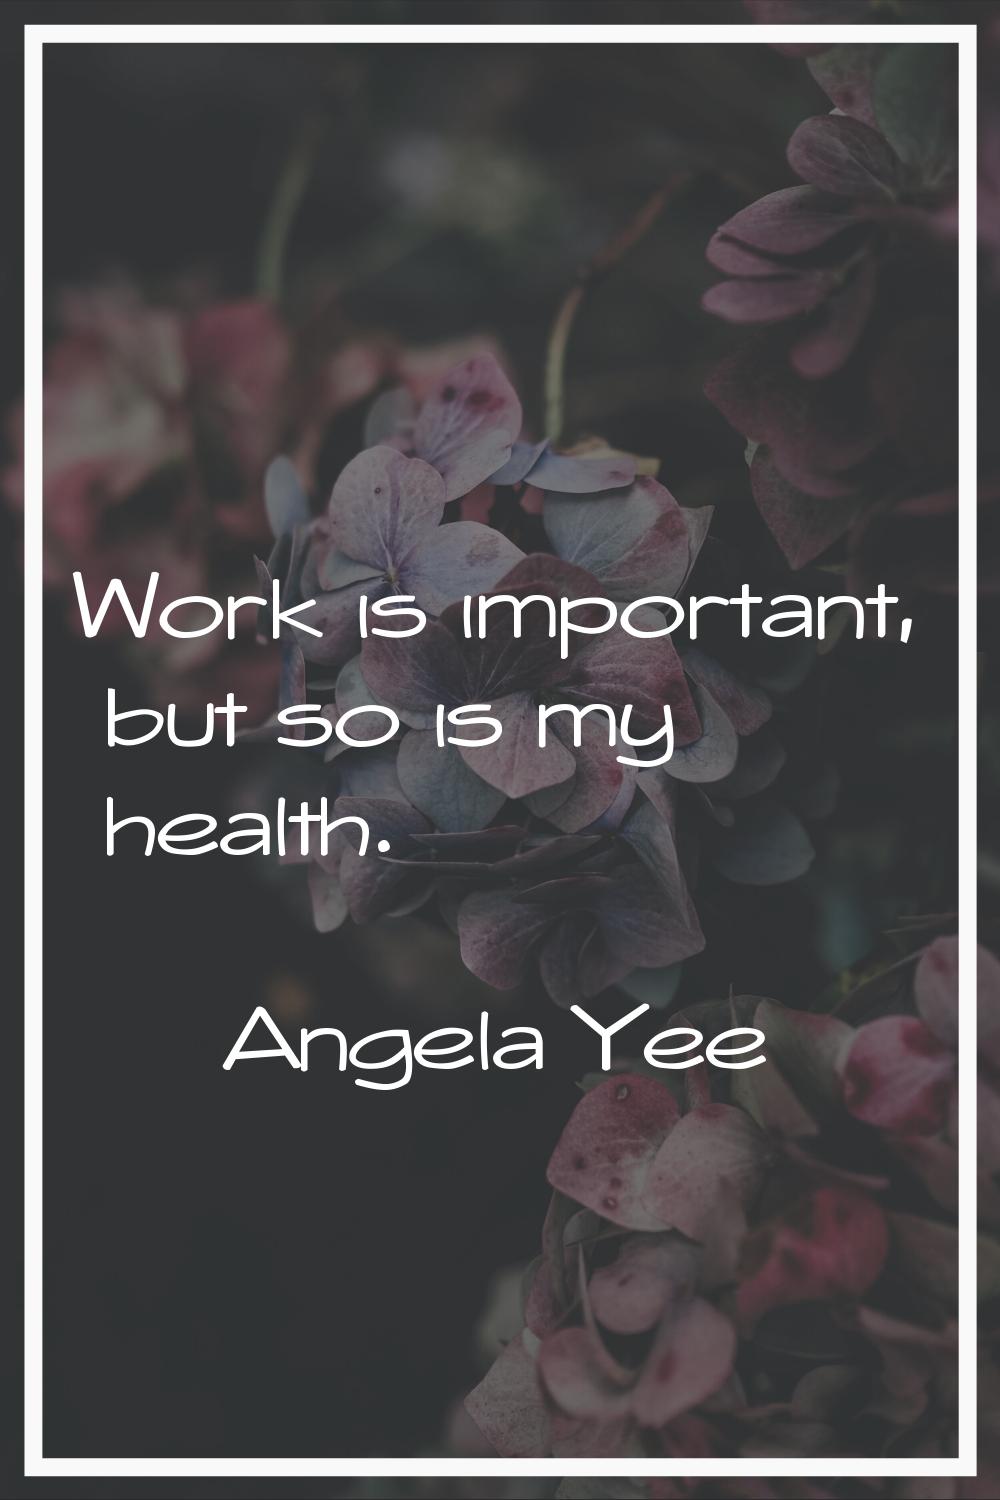 Work is important, but so is my health.